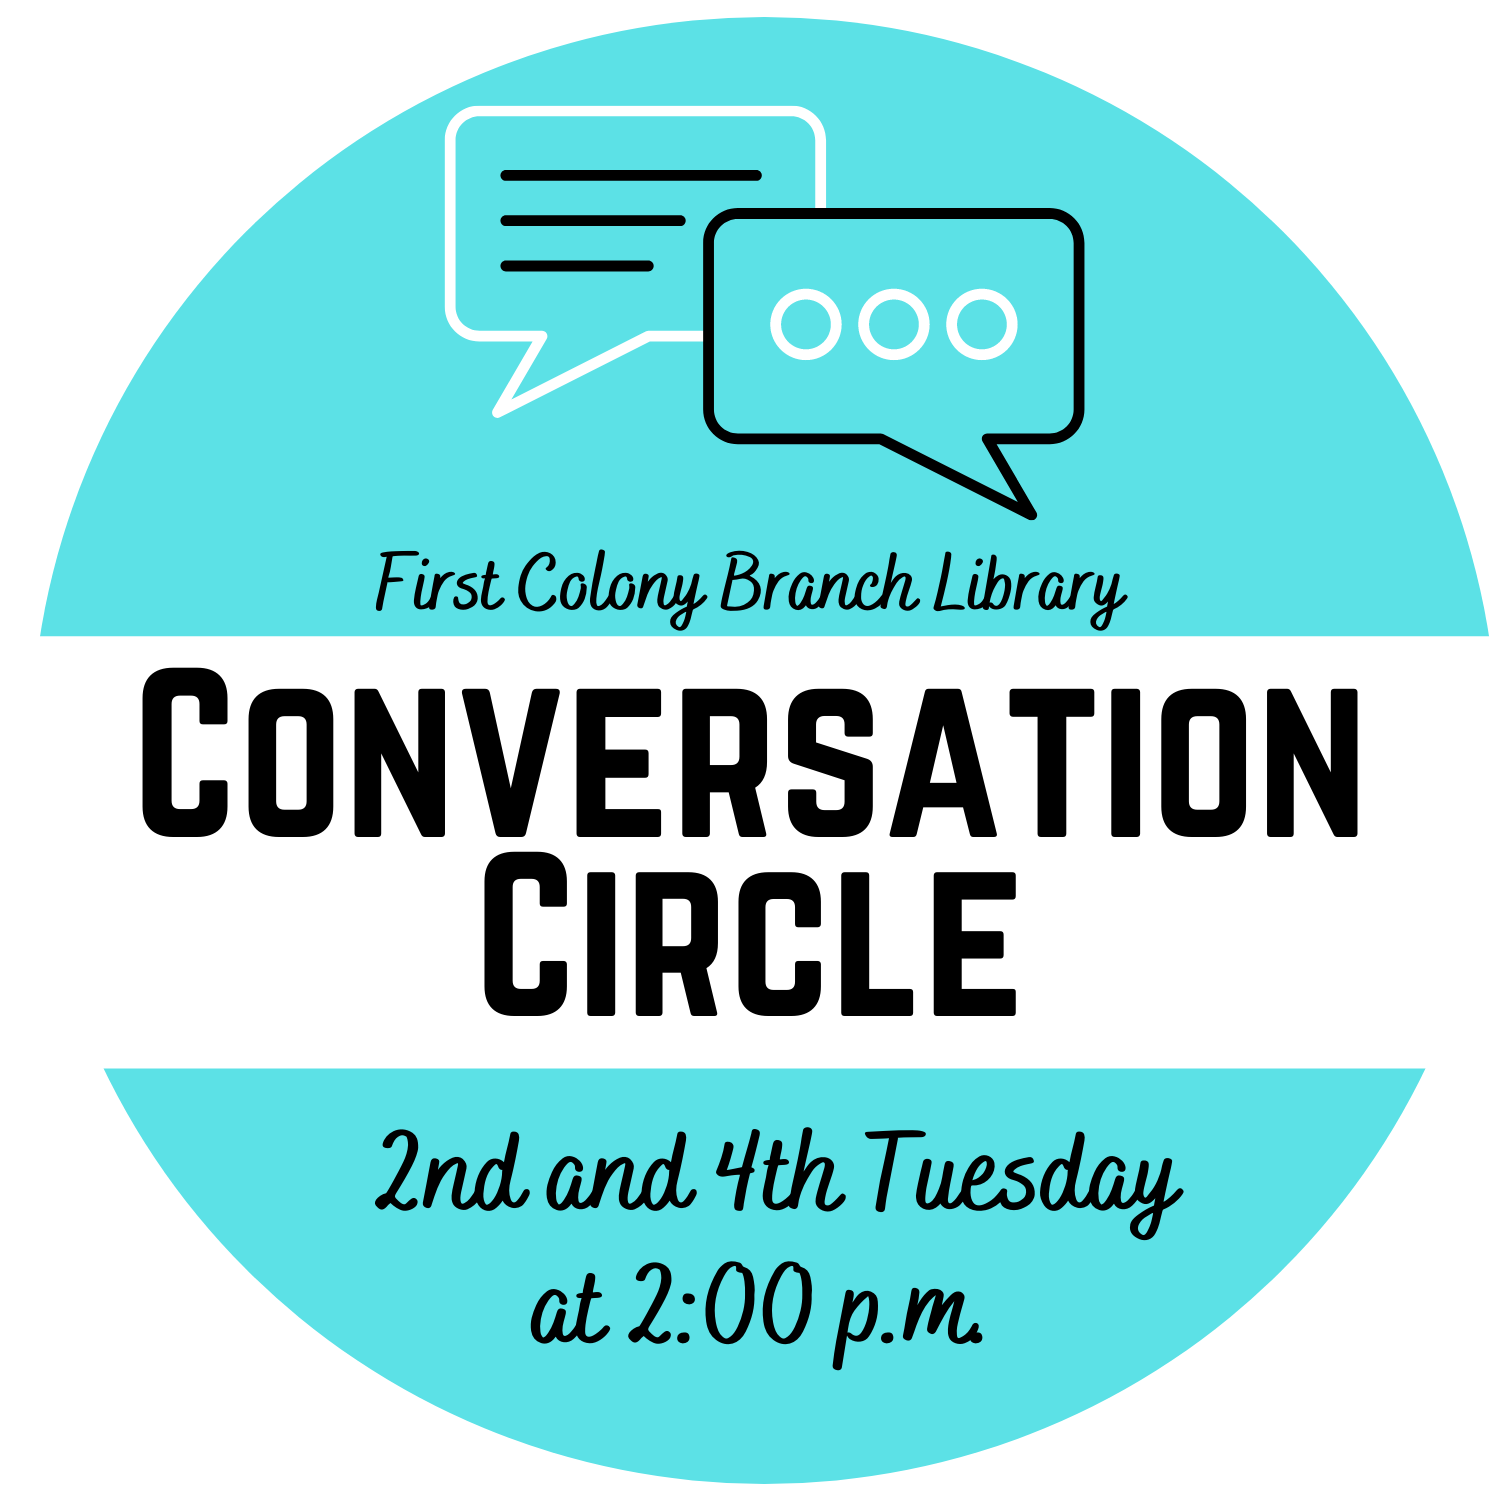 Teal circle with white bar across middle. In white bar there is black text saying conversation circle. 